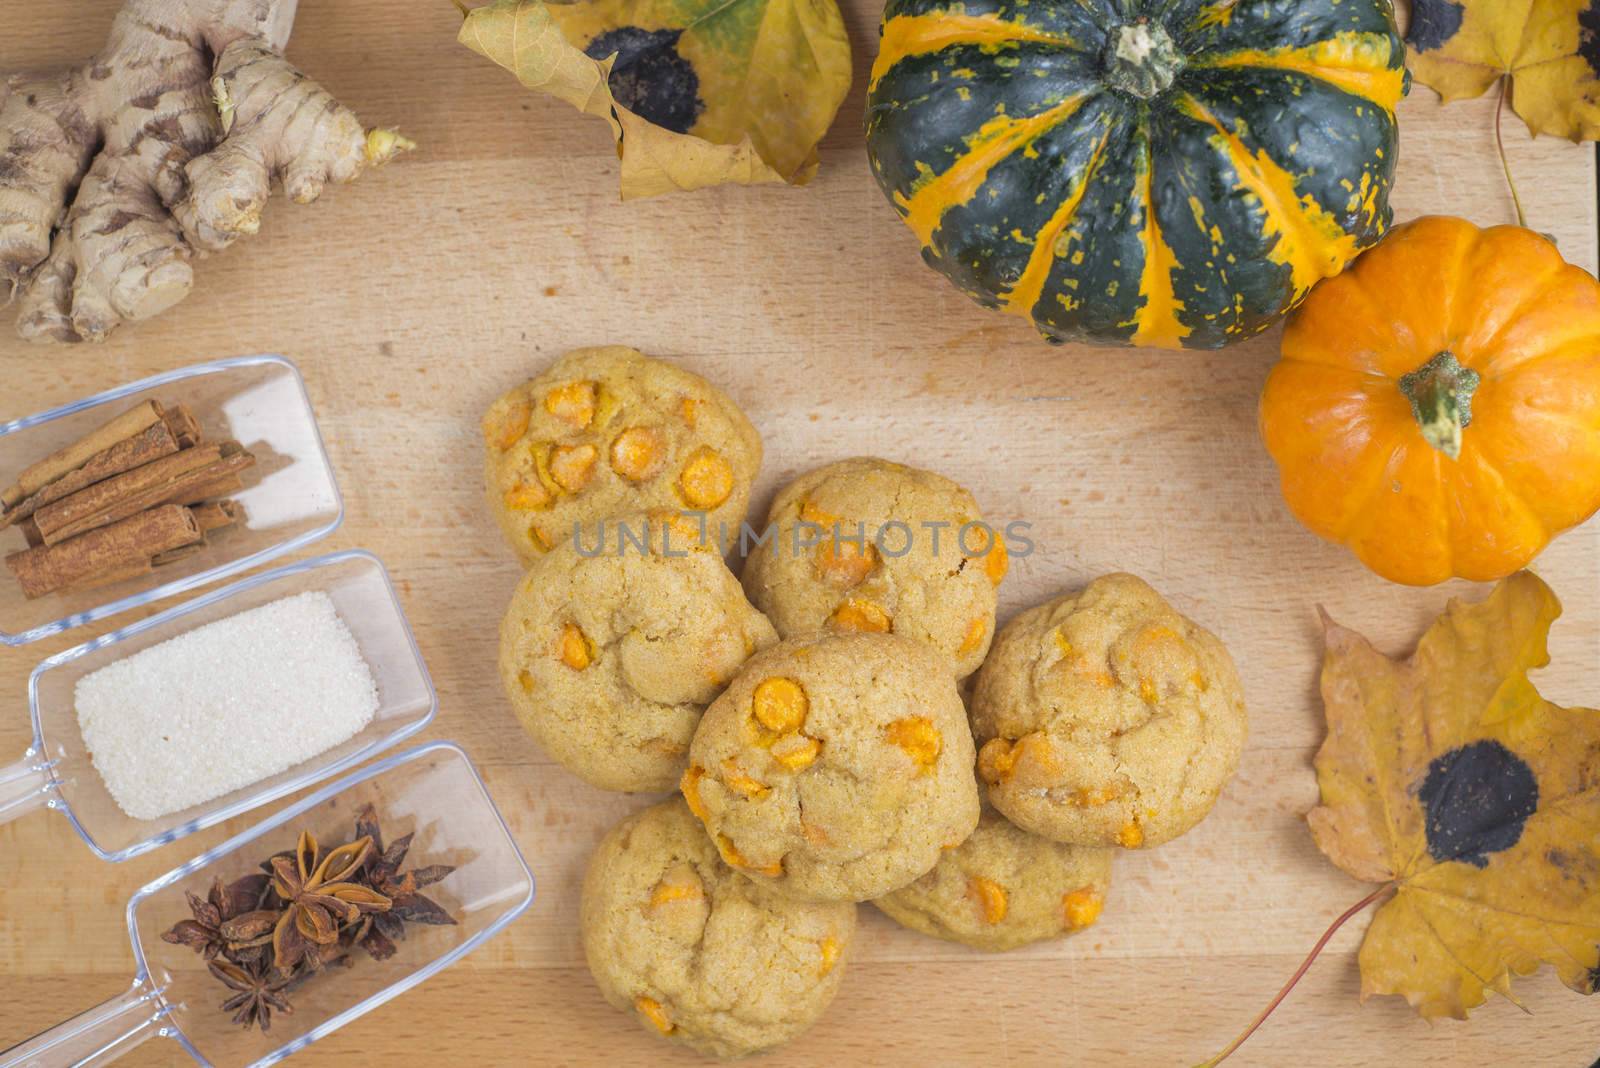 Spice pumpkin homemade cookies against wood background with ingredients